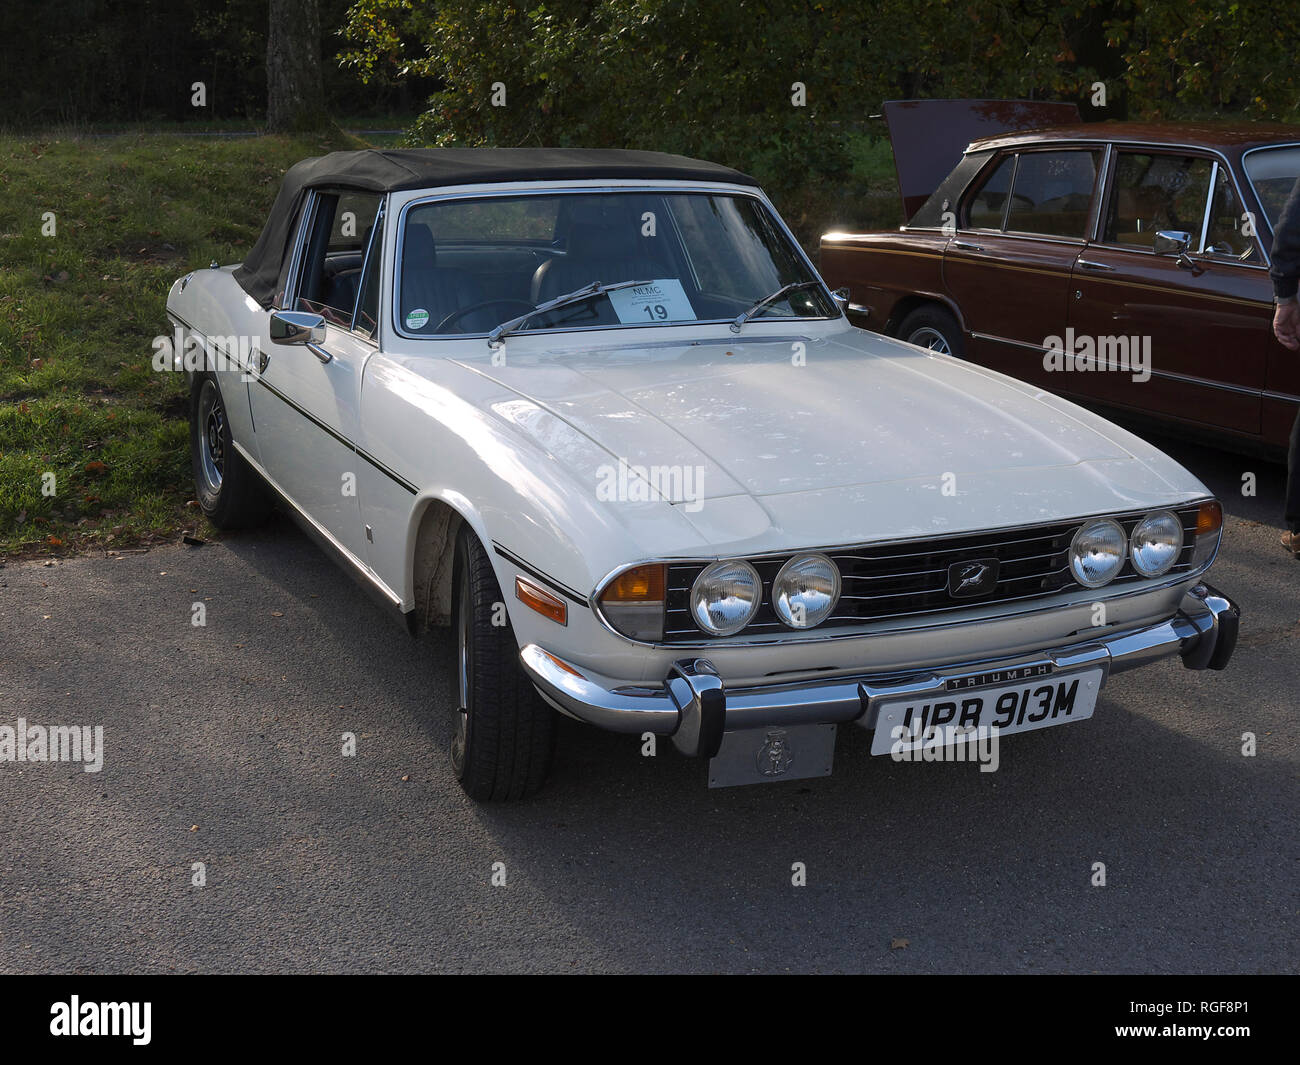 Classic 1973 Triumph Stag at Willingham woods Stock Photo